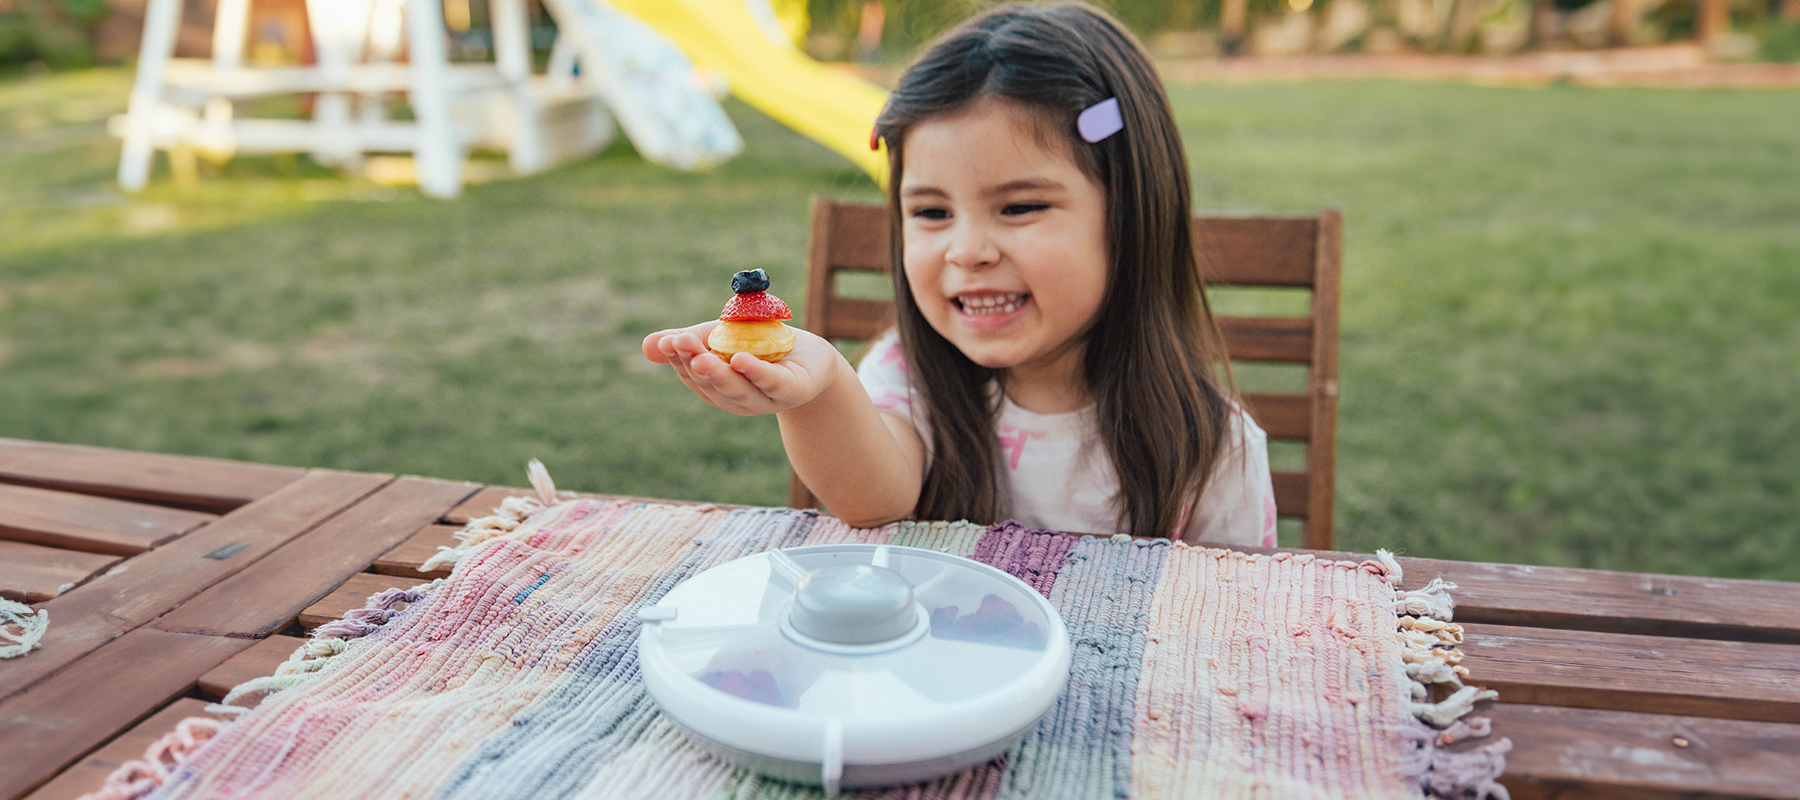 7 Expert-Backed Tips for Nurturing Healthy Eating Habits in Children